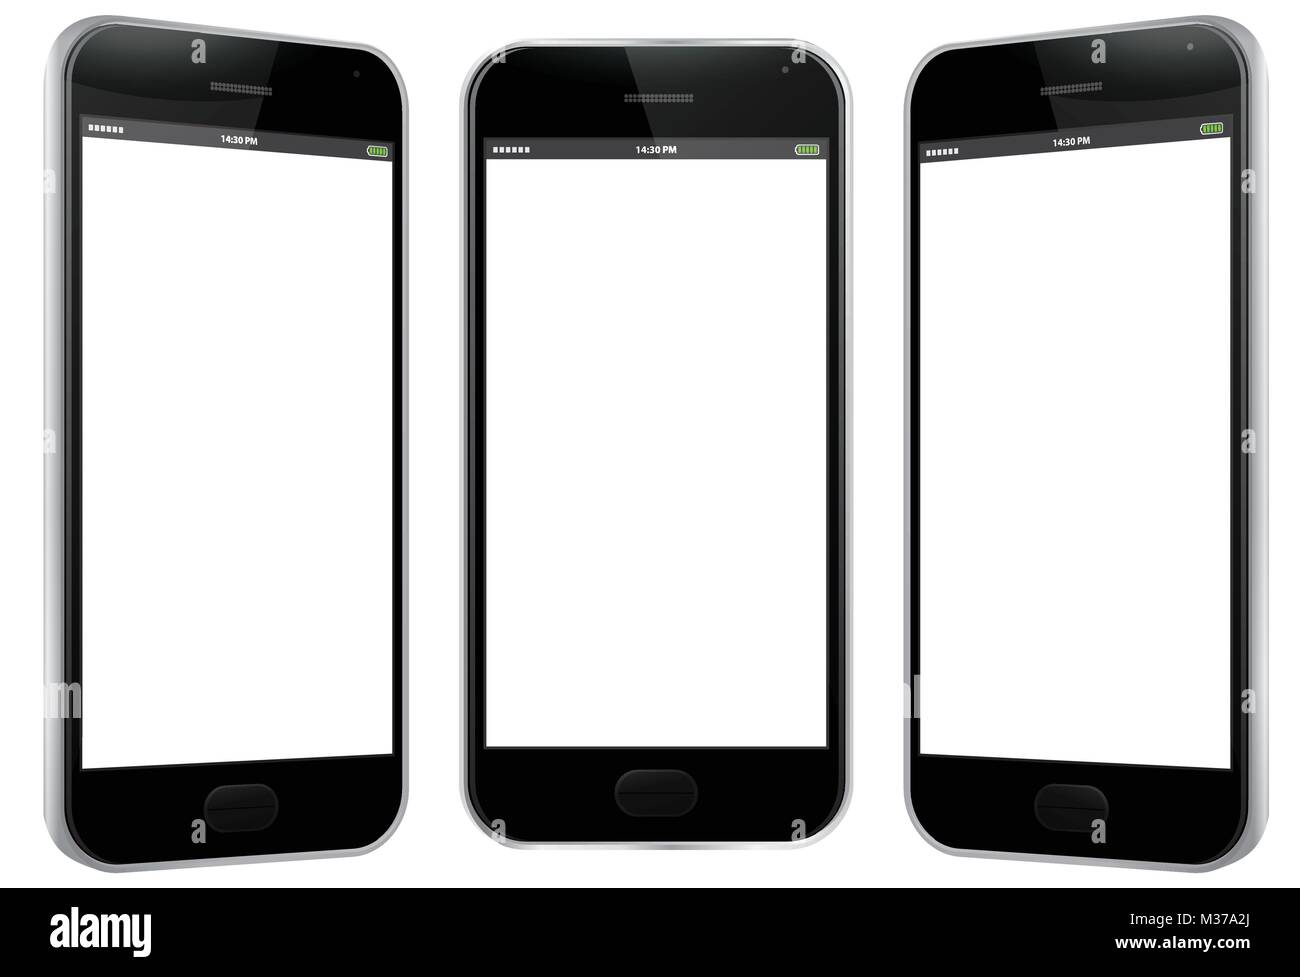 Mobile Phone Vector Illustration - Different views. Stock Vector